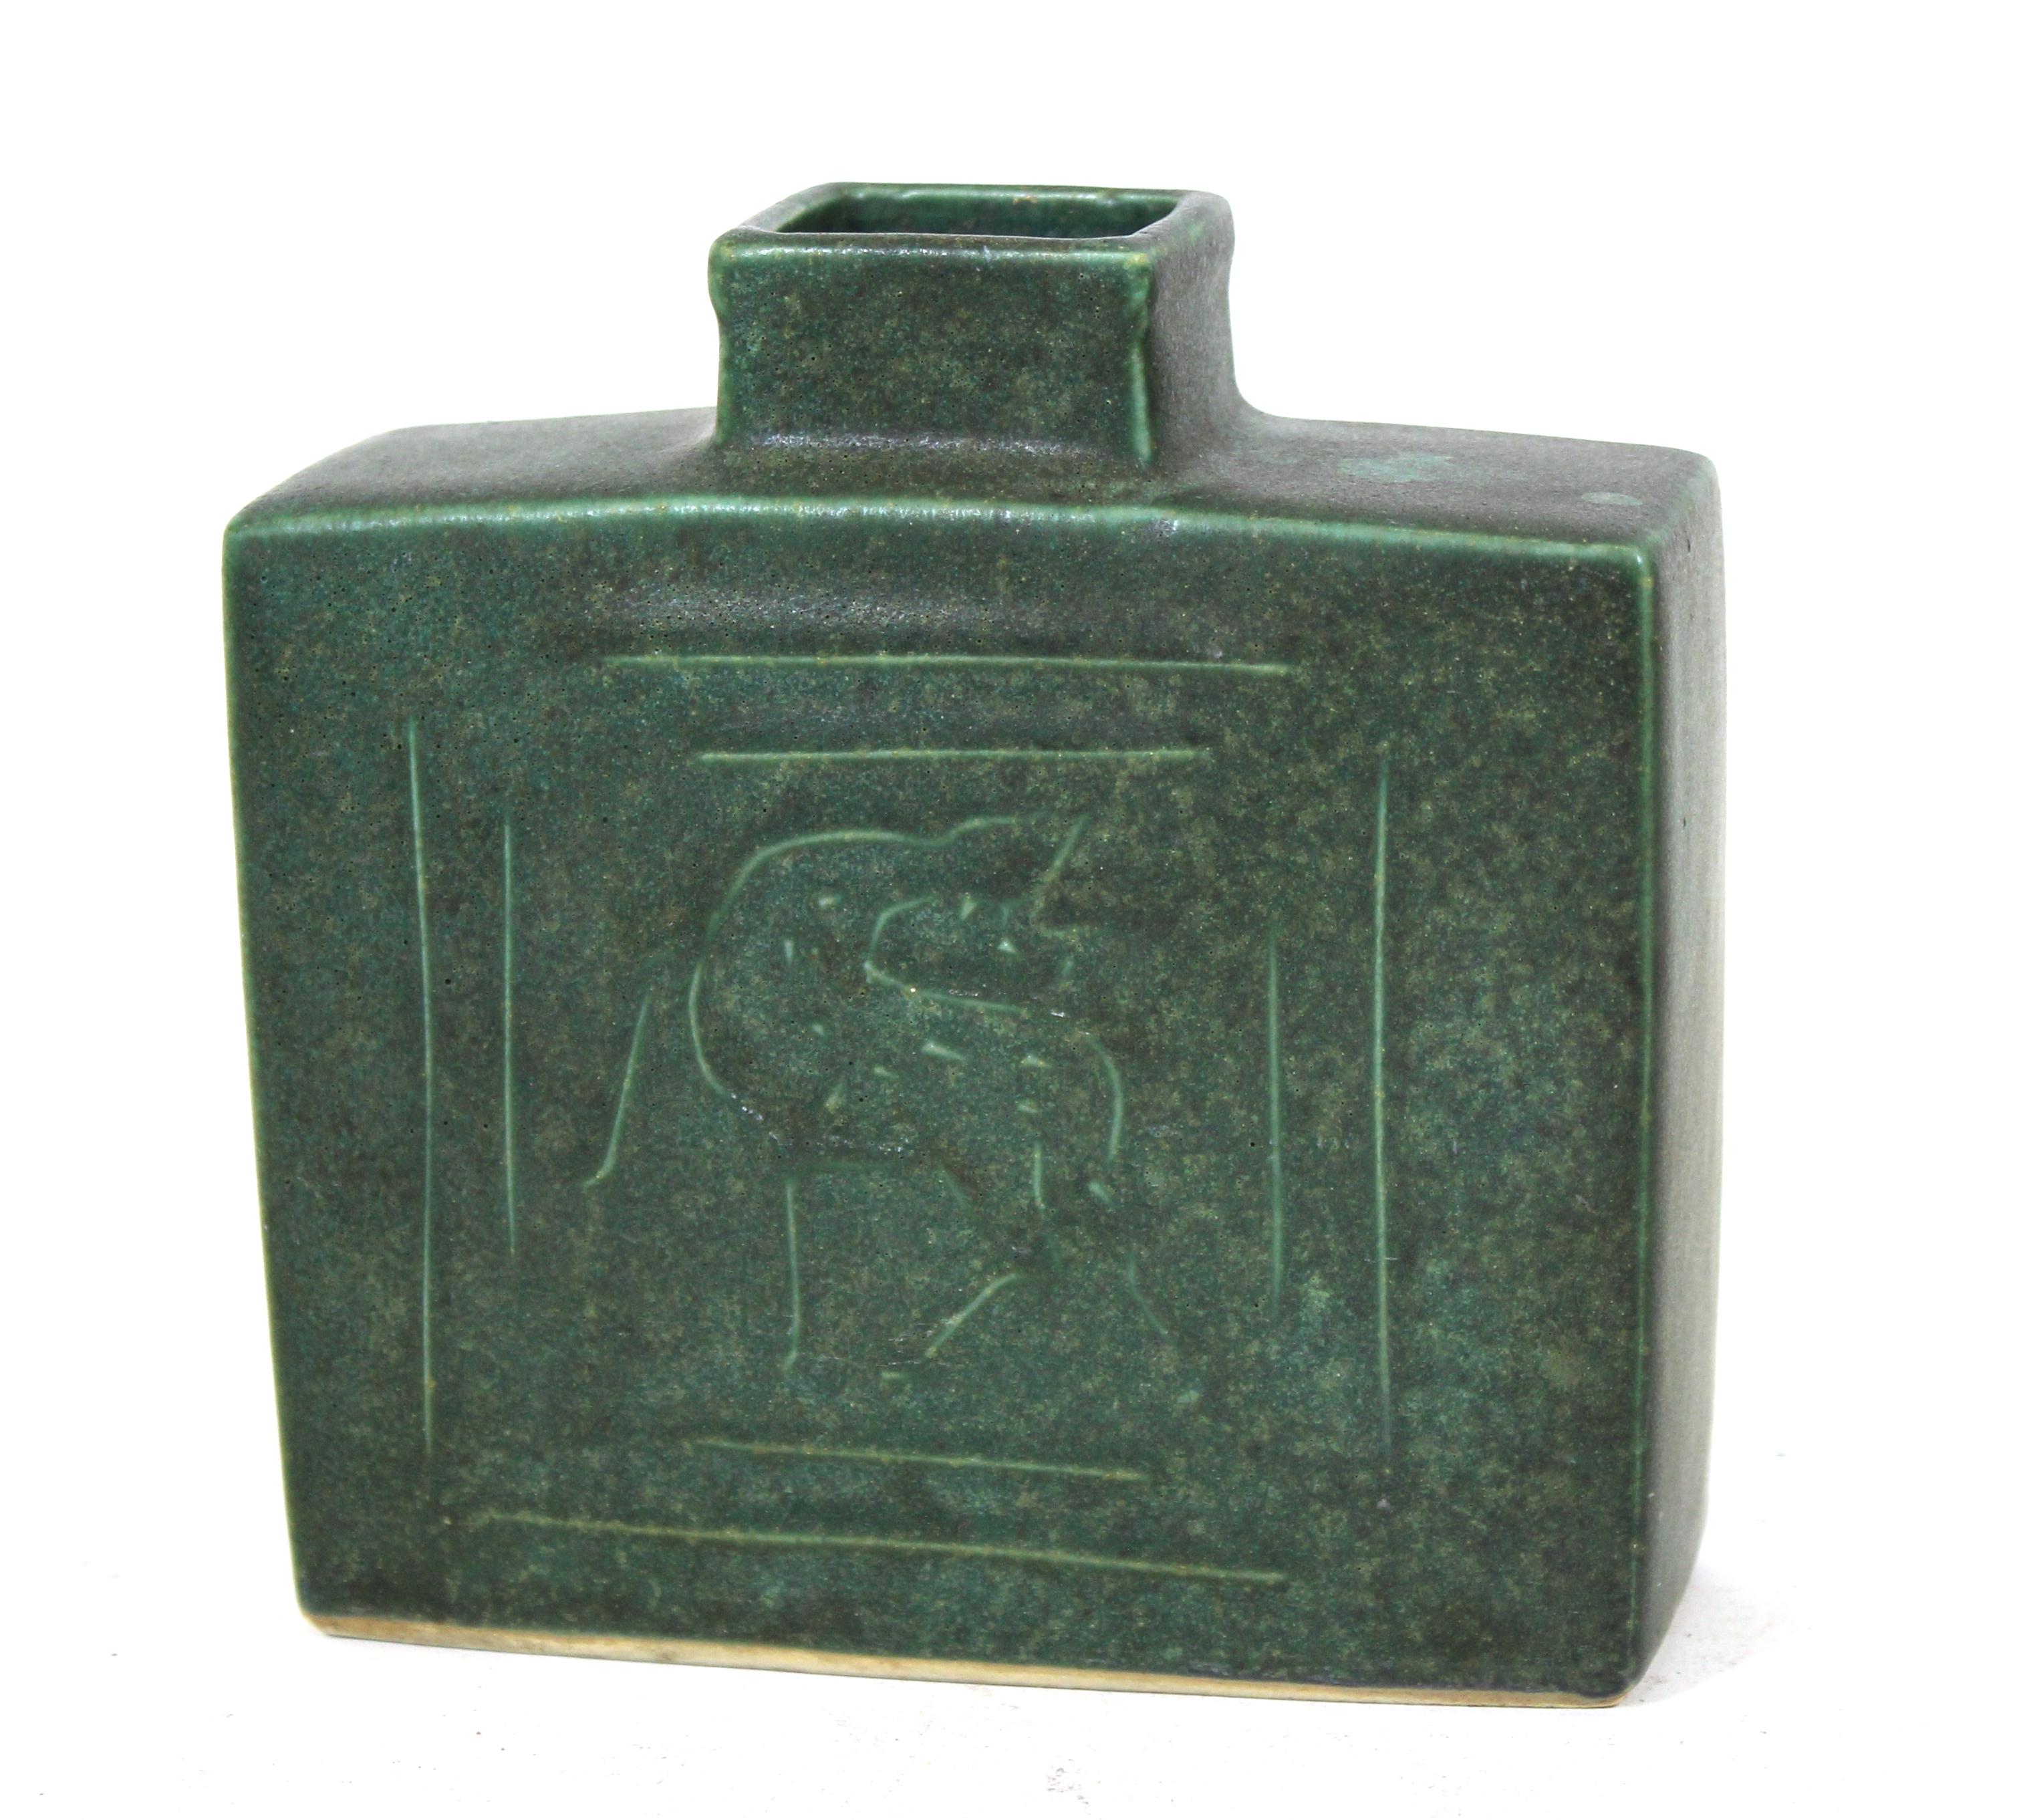 Mid-Century Modern rectangular shape pottery vase in green with stylized deer on the front and back side. Illegibly signed on bottom.